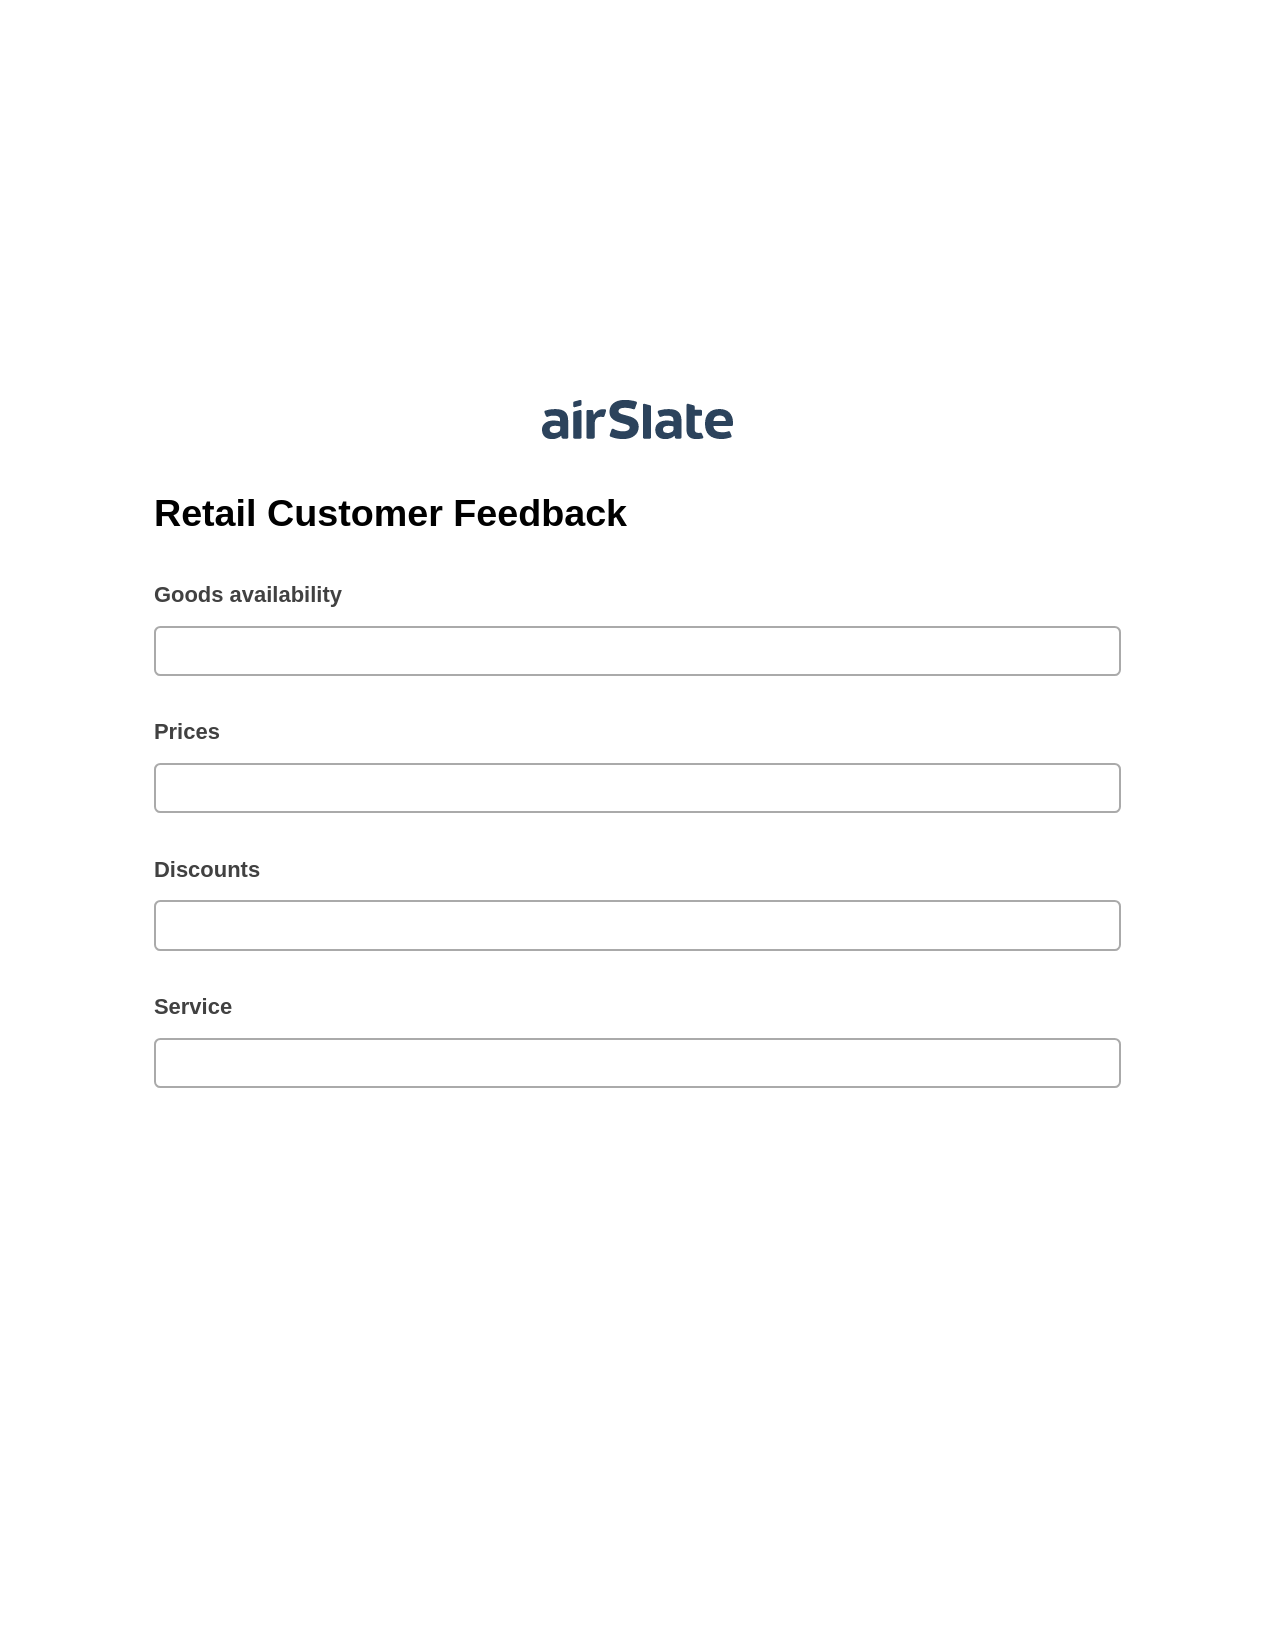 Retail Customer Feedback Pre-fill from CSV File Bot, Remove Tags From Slate Bot, OneDrive Bot